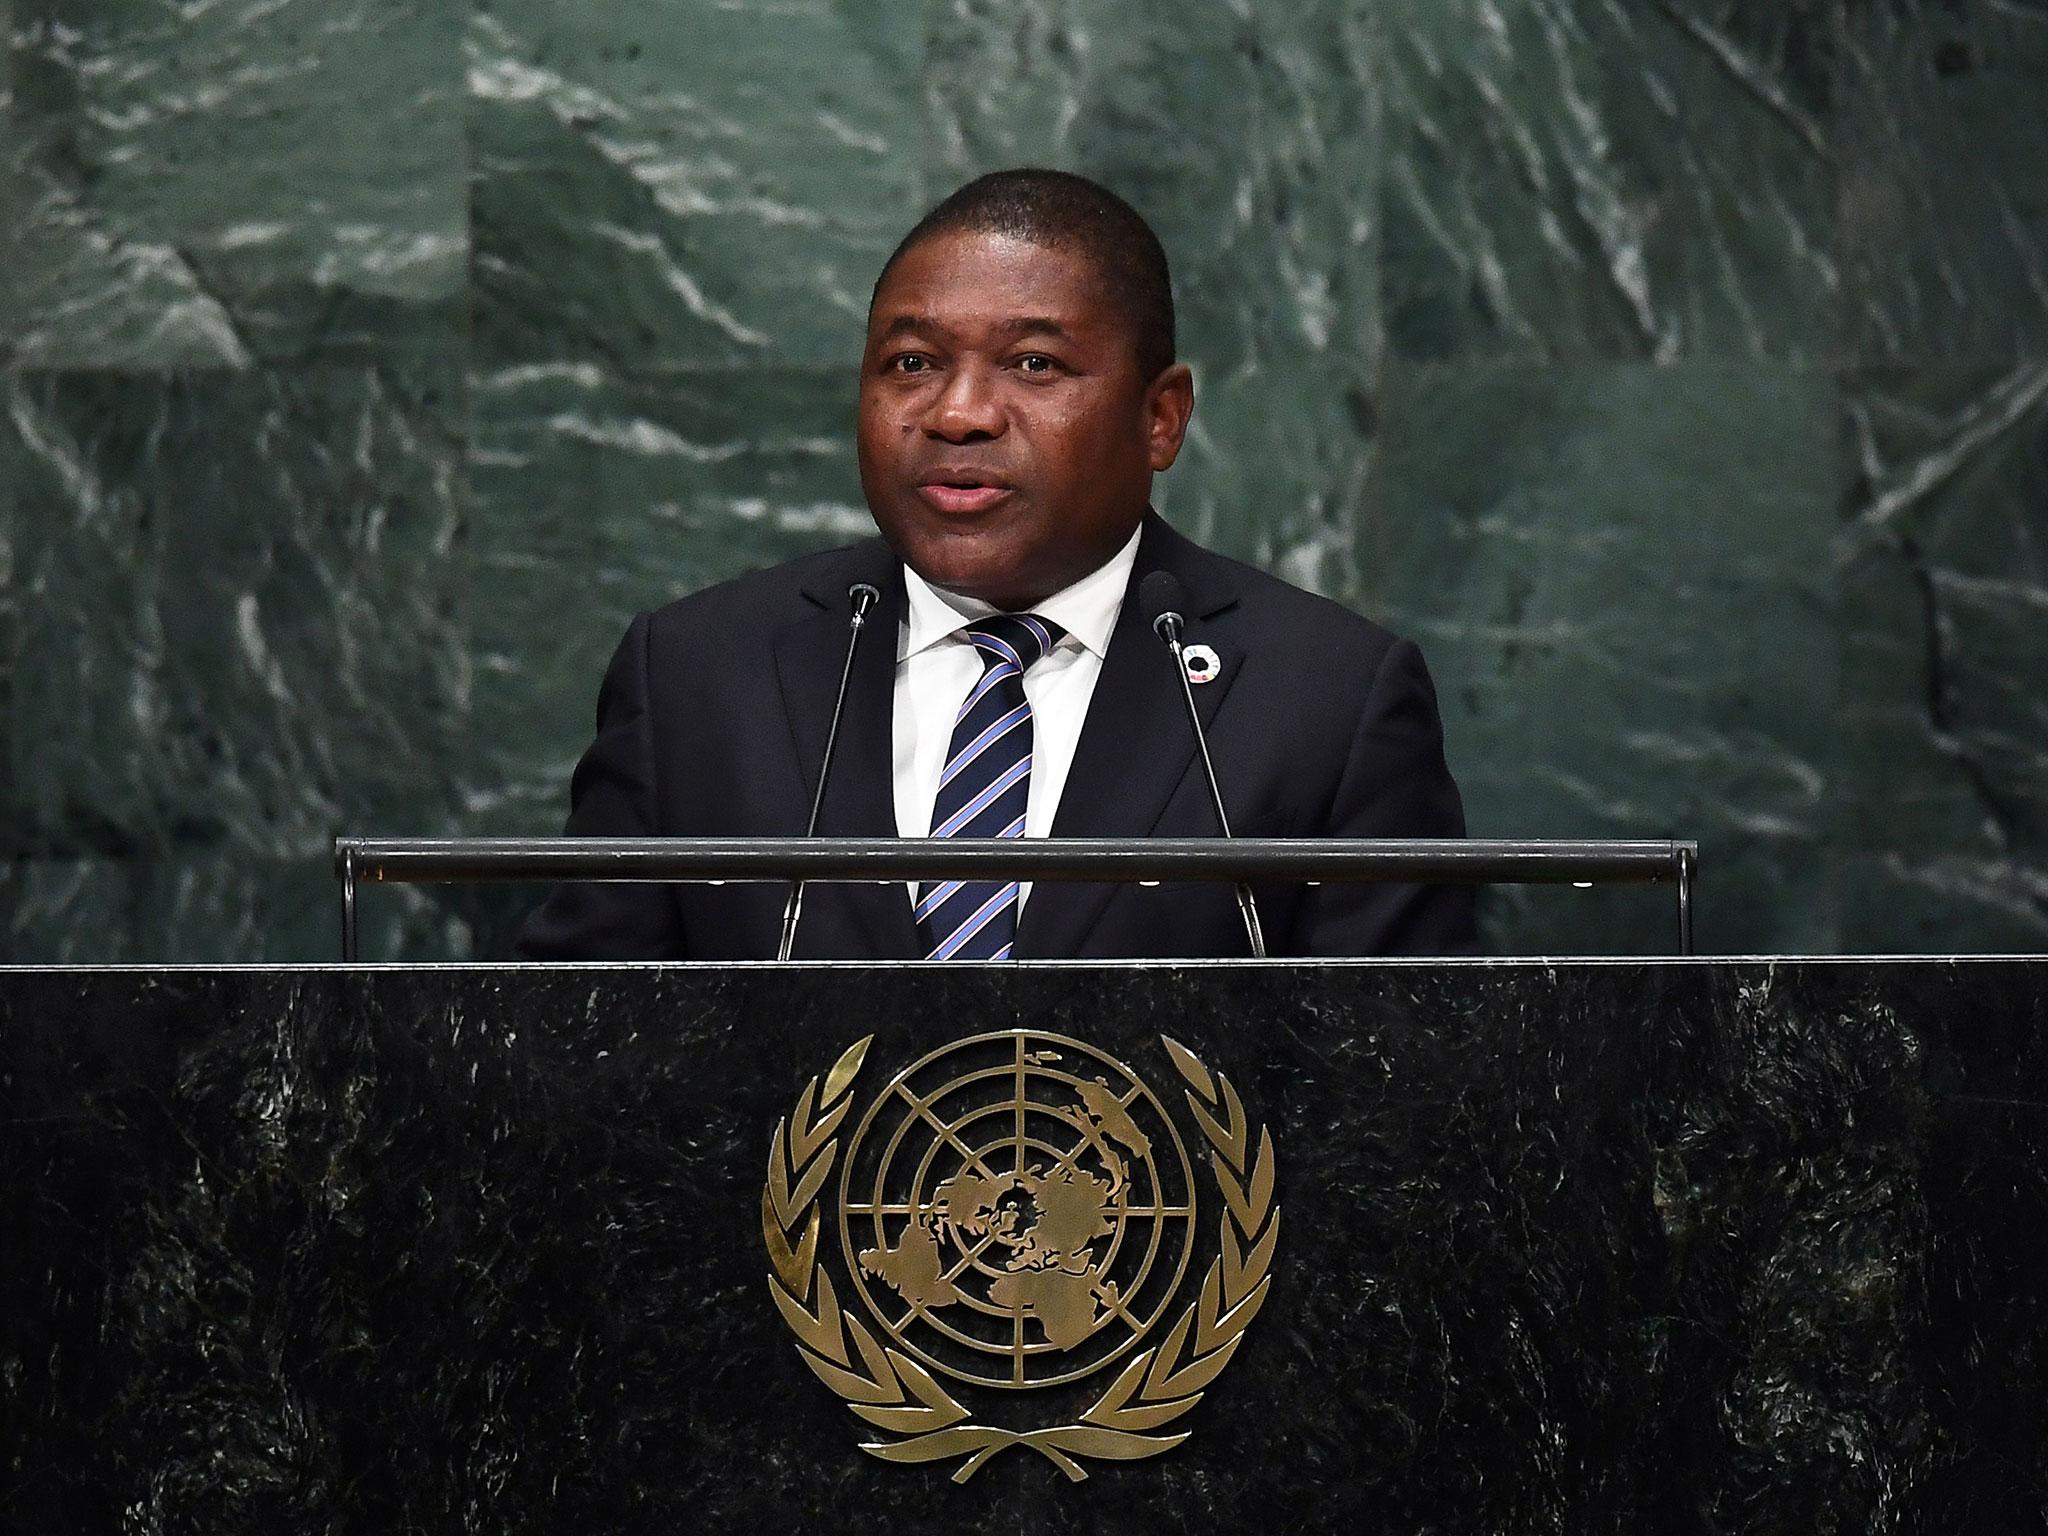 Mozambique's President Filipe Jacinto Nyusi addresses the 71st session of United Nations General Assembly at the UN headquarters in New York on 21 September, 2016